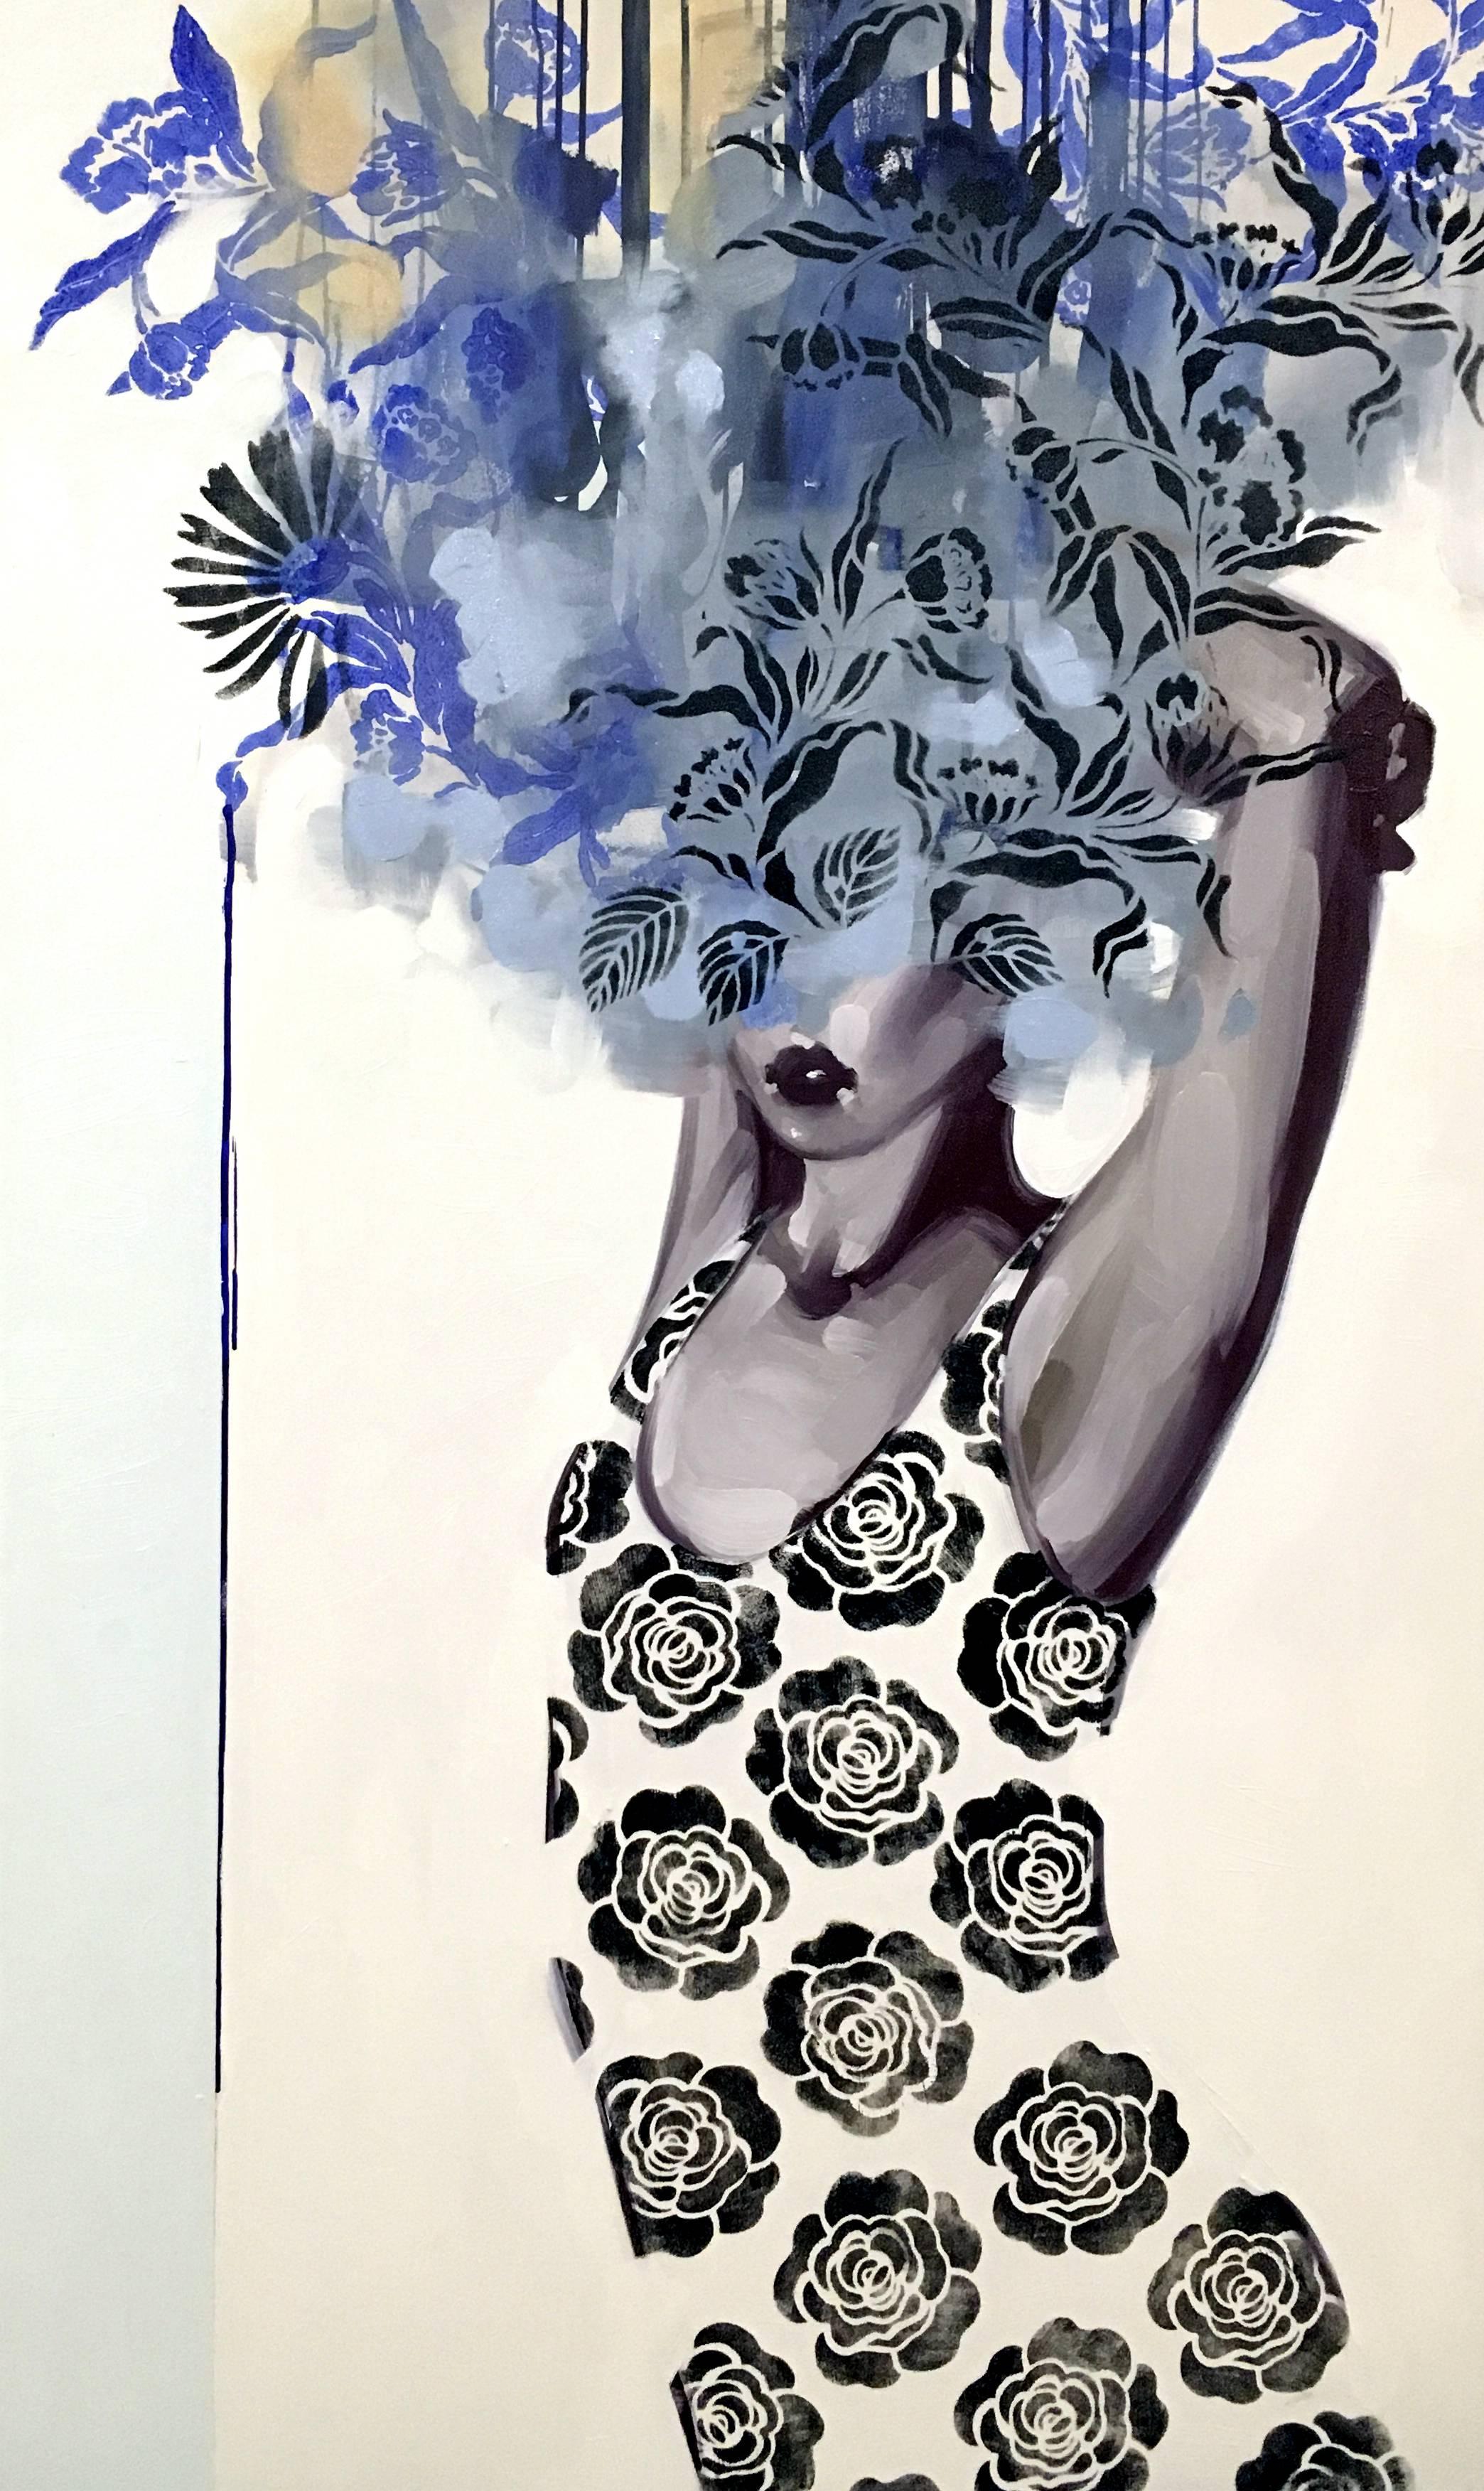 Anna Kincaide Figurative Painting - "Tempest" black & white oil painting of woman with floral bouquet over her eyes